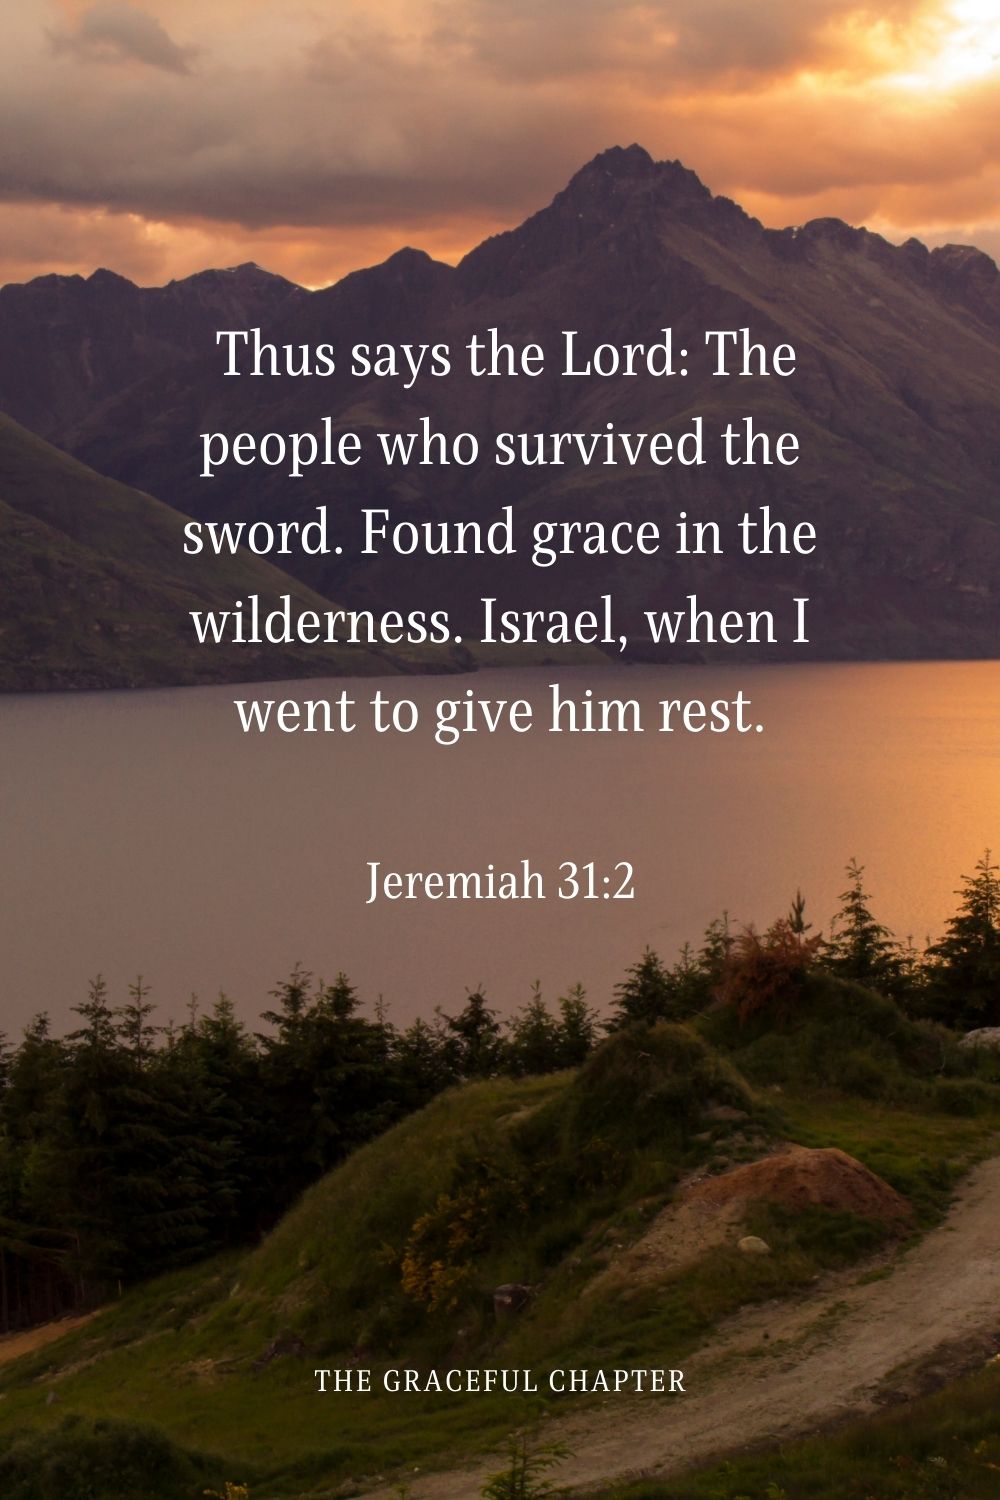  Thus says the Lord: The people who survived the sword. Found grace in the wilderness. Israel, when I went to give him rest.